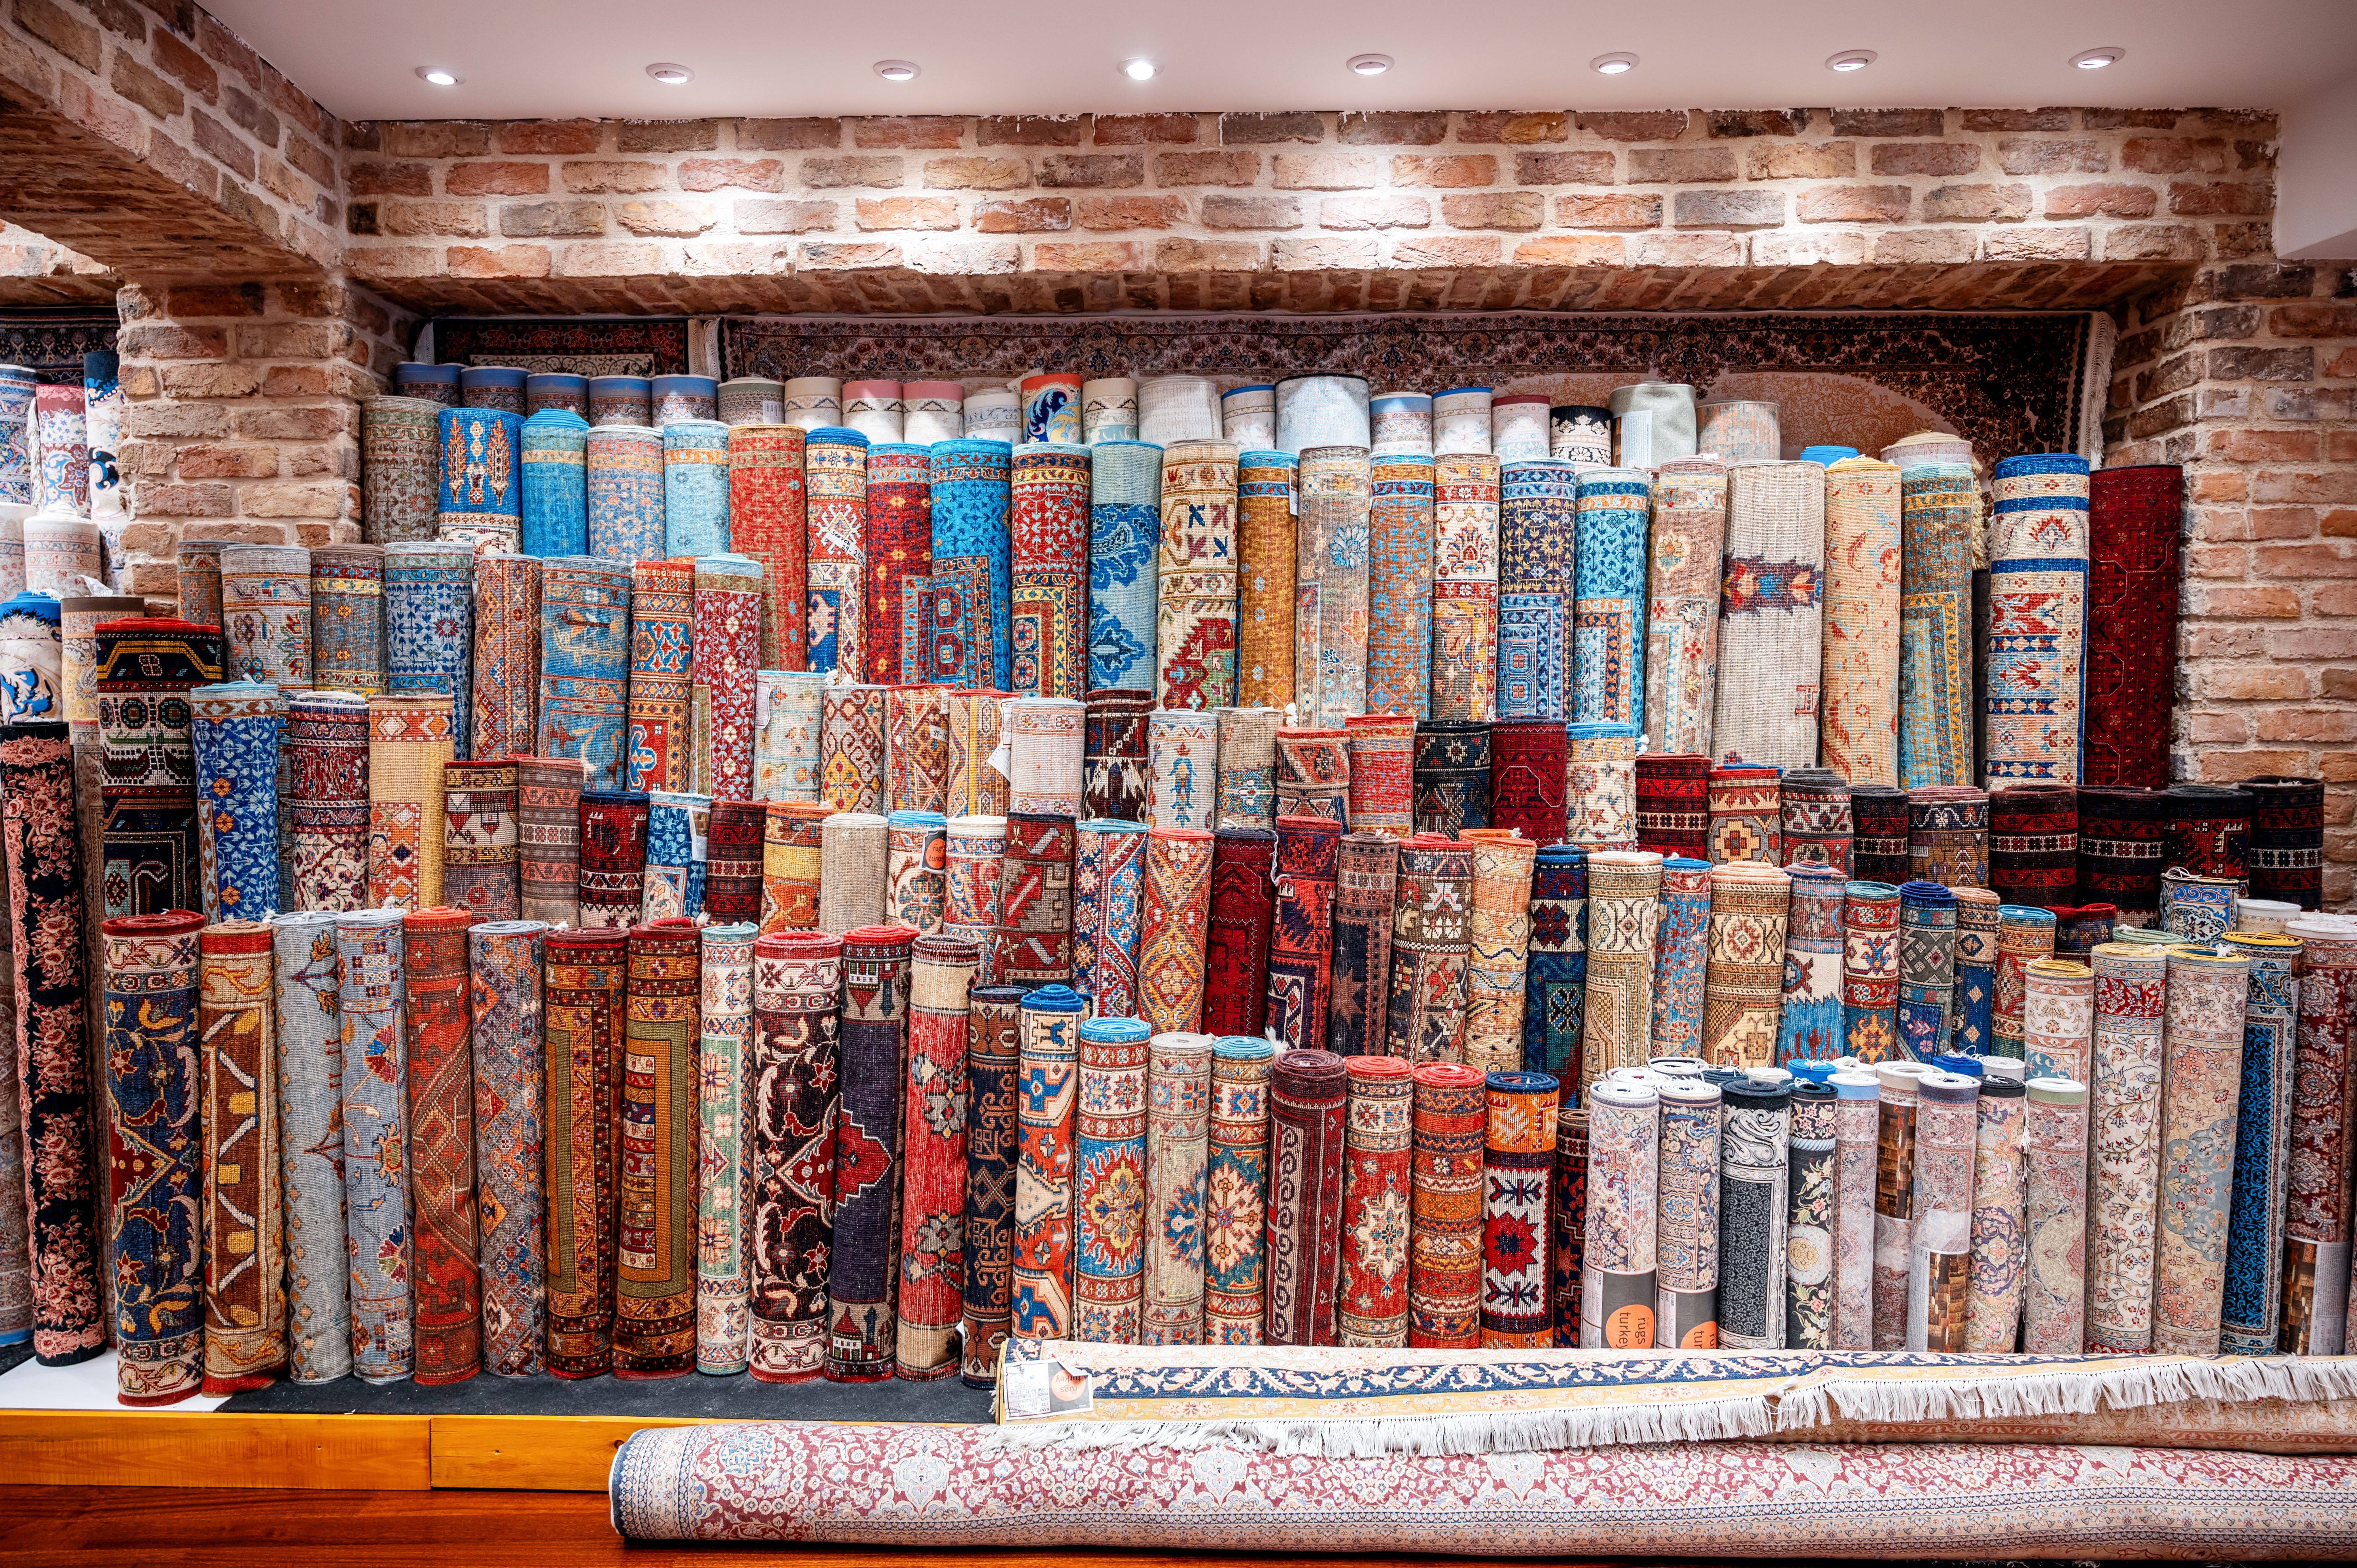 50 Years. Superb Collection of Persian Rugs. - Including the largest selection of Bijars outside Iran | Call Us at 1-844-650-0011